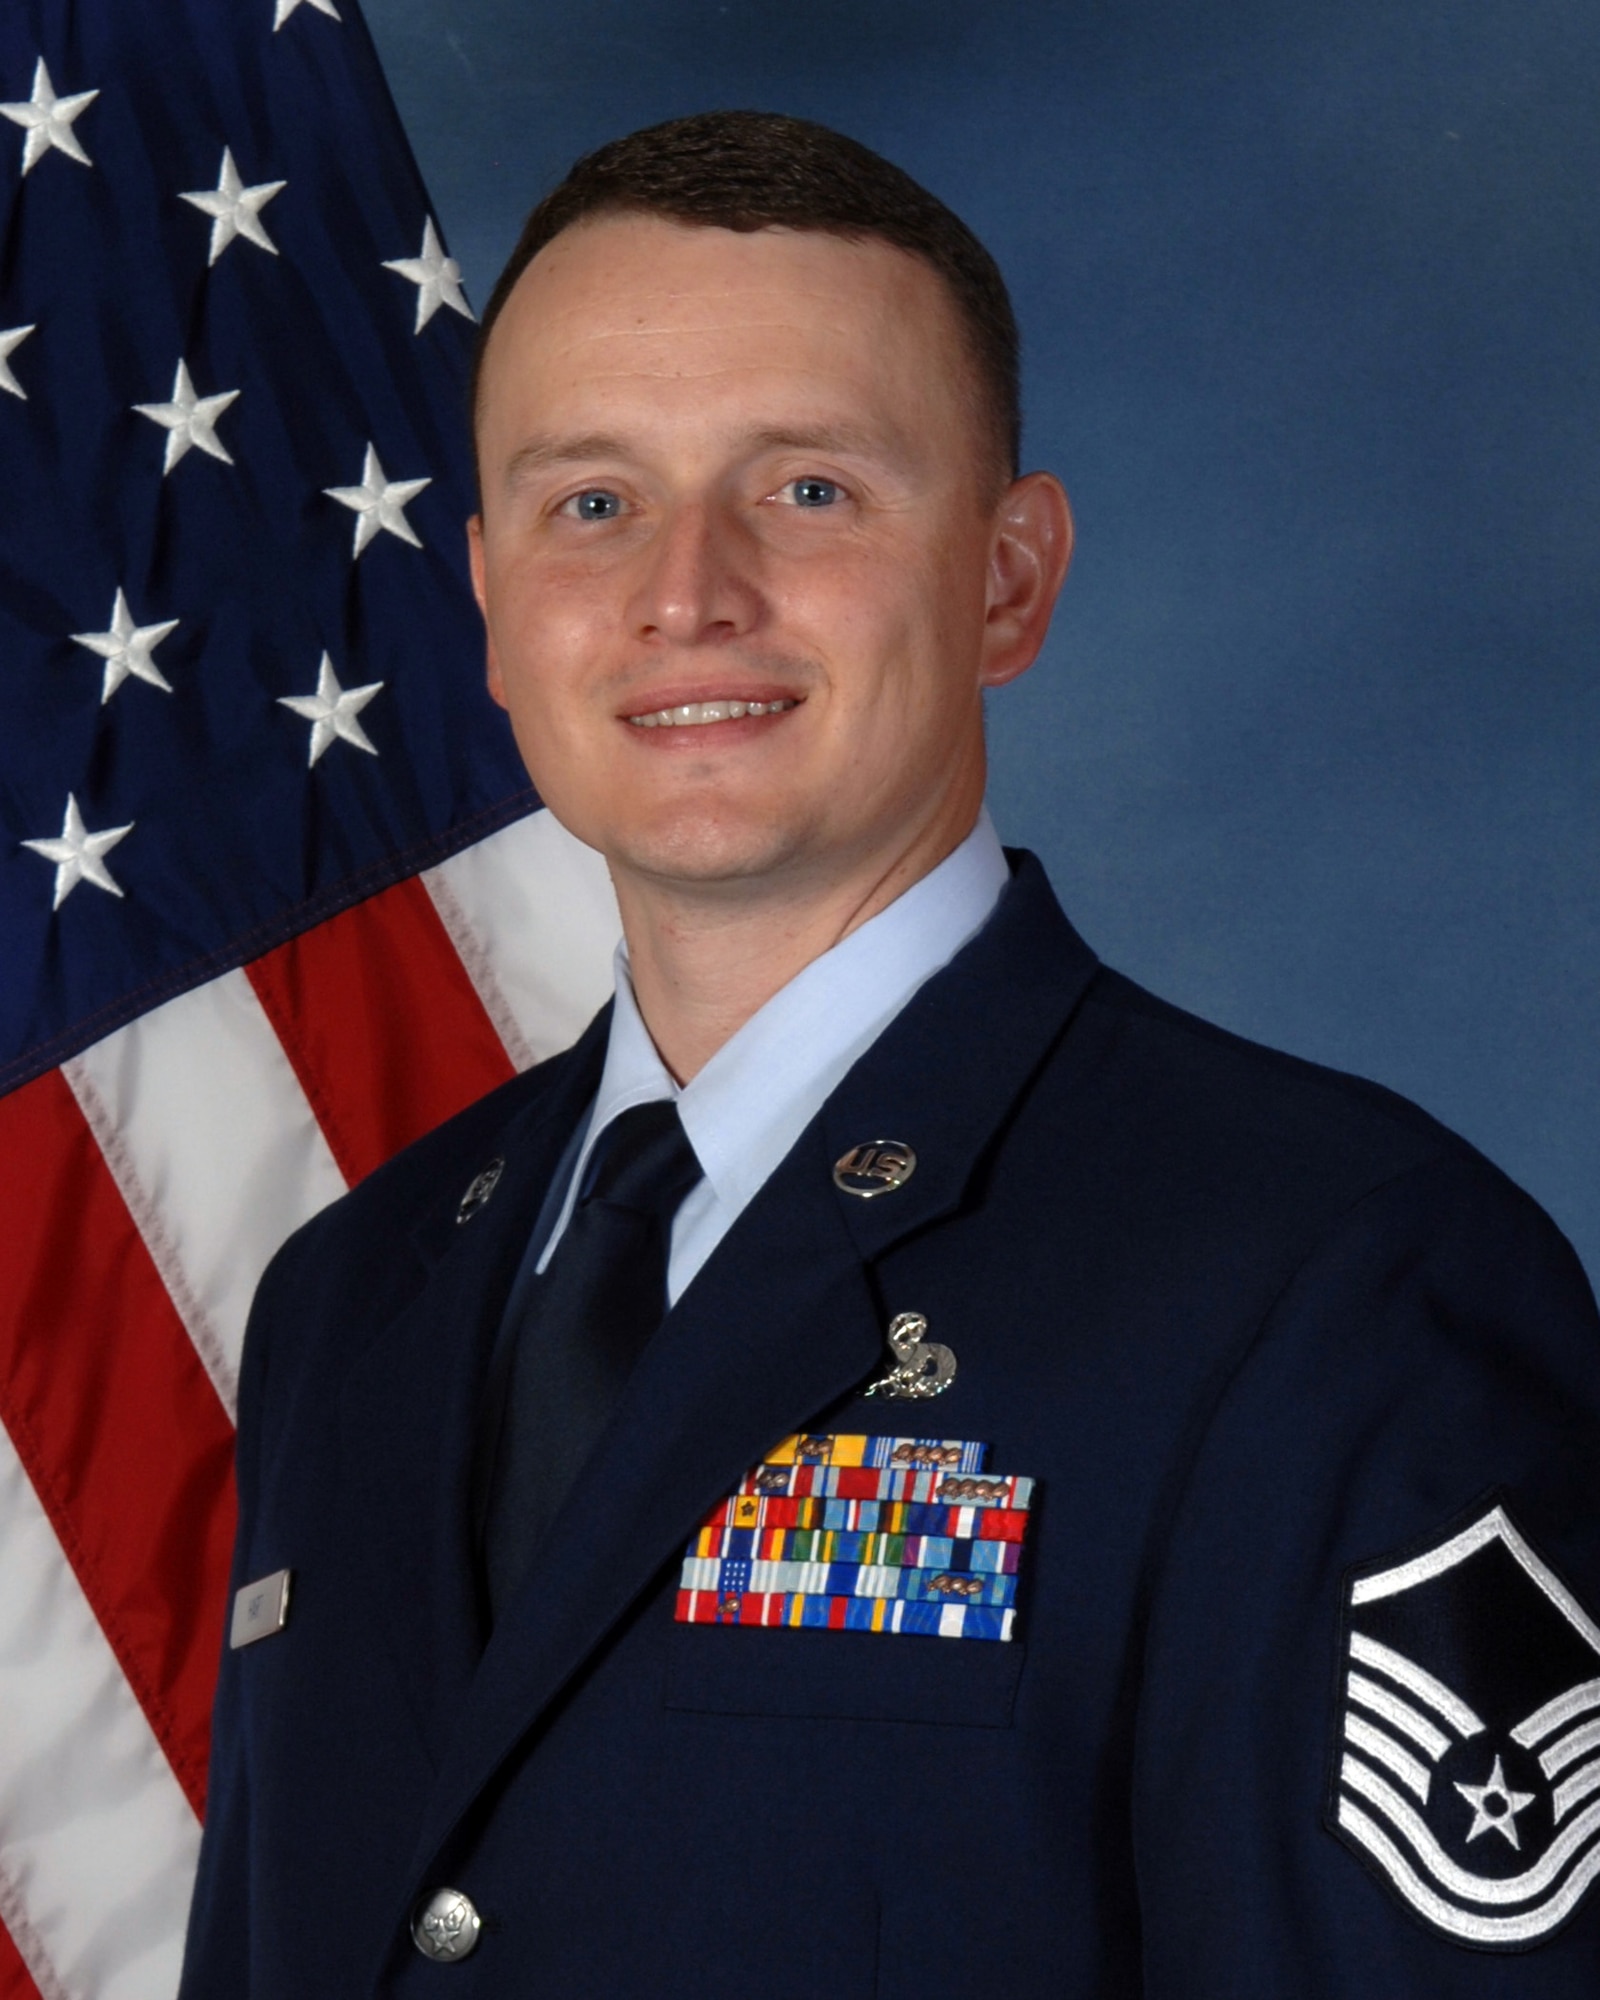 BUCKLEY AIR FORCE BASE, Colo. -- Congratulations to Master Sgt. Christopher Hart, 460th Space Communications Squadron, who is the 14th Air Force Senior NCO of the Quarter. (U.S. Air Force photo by Senior Airman Erika Brooke)